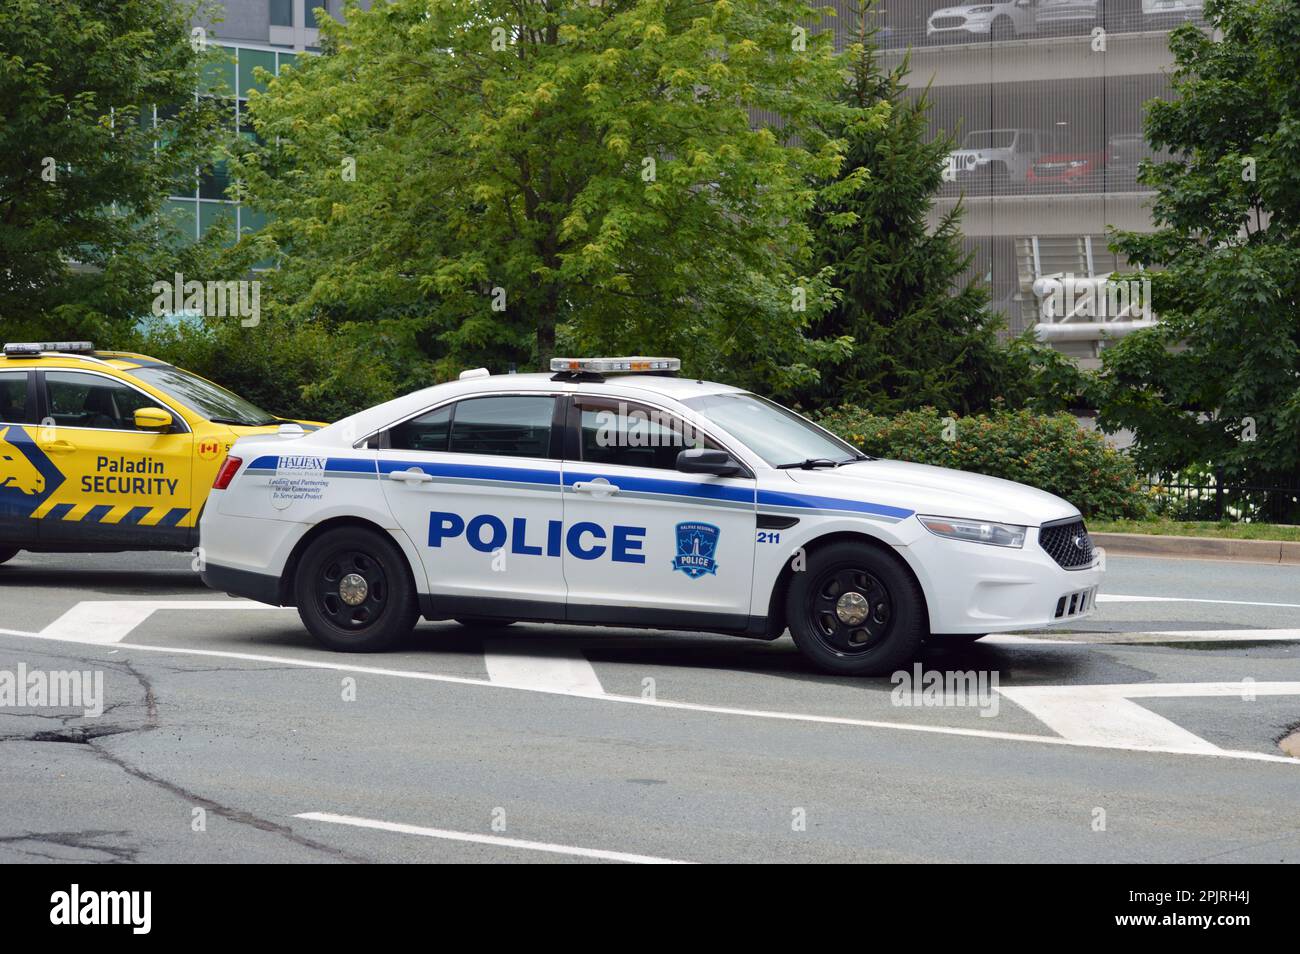 A Halifax Regional Police car, a Ford Police Interceptor, parked outside the Halifax Stanfield International Airport terminal in Nova Scotia, Canada Stock Photo